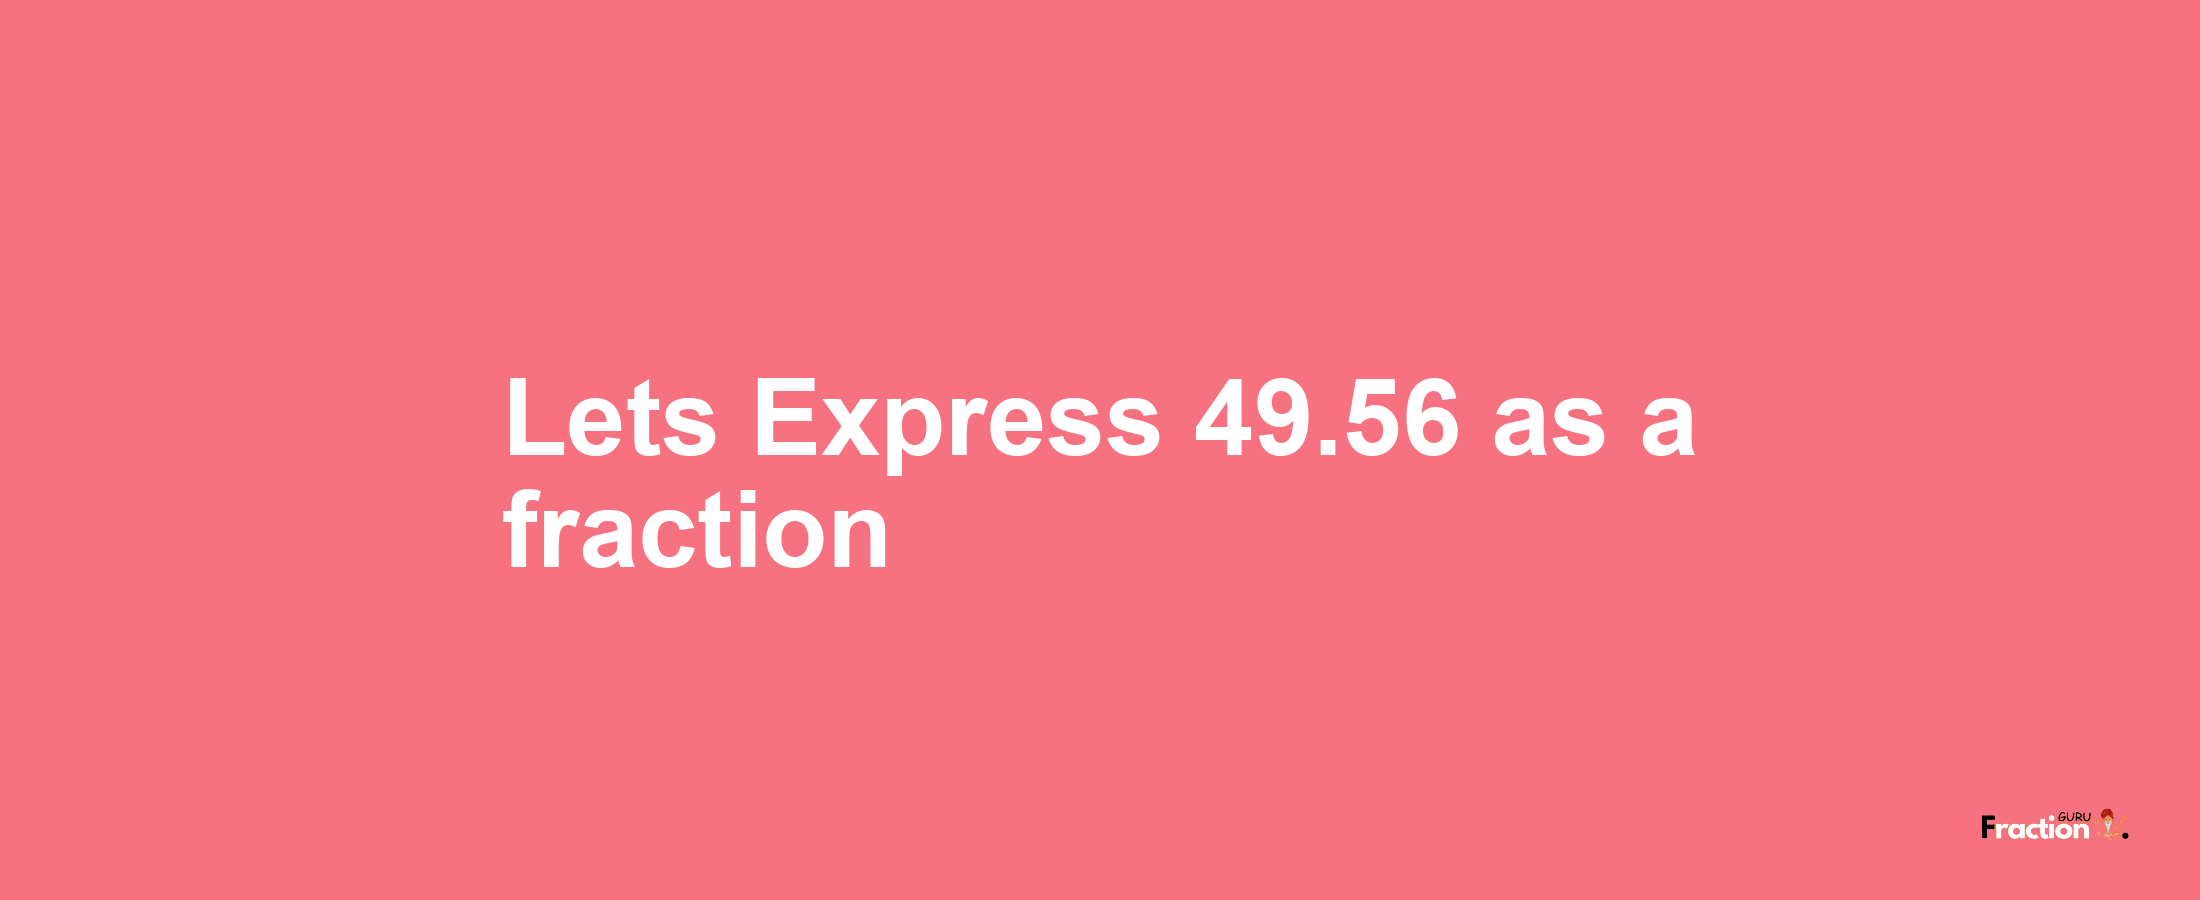 Lets Express 49.56 as afraction